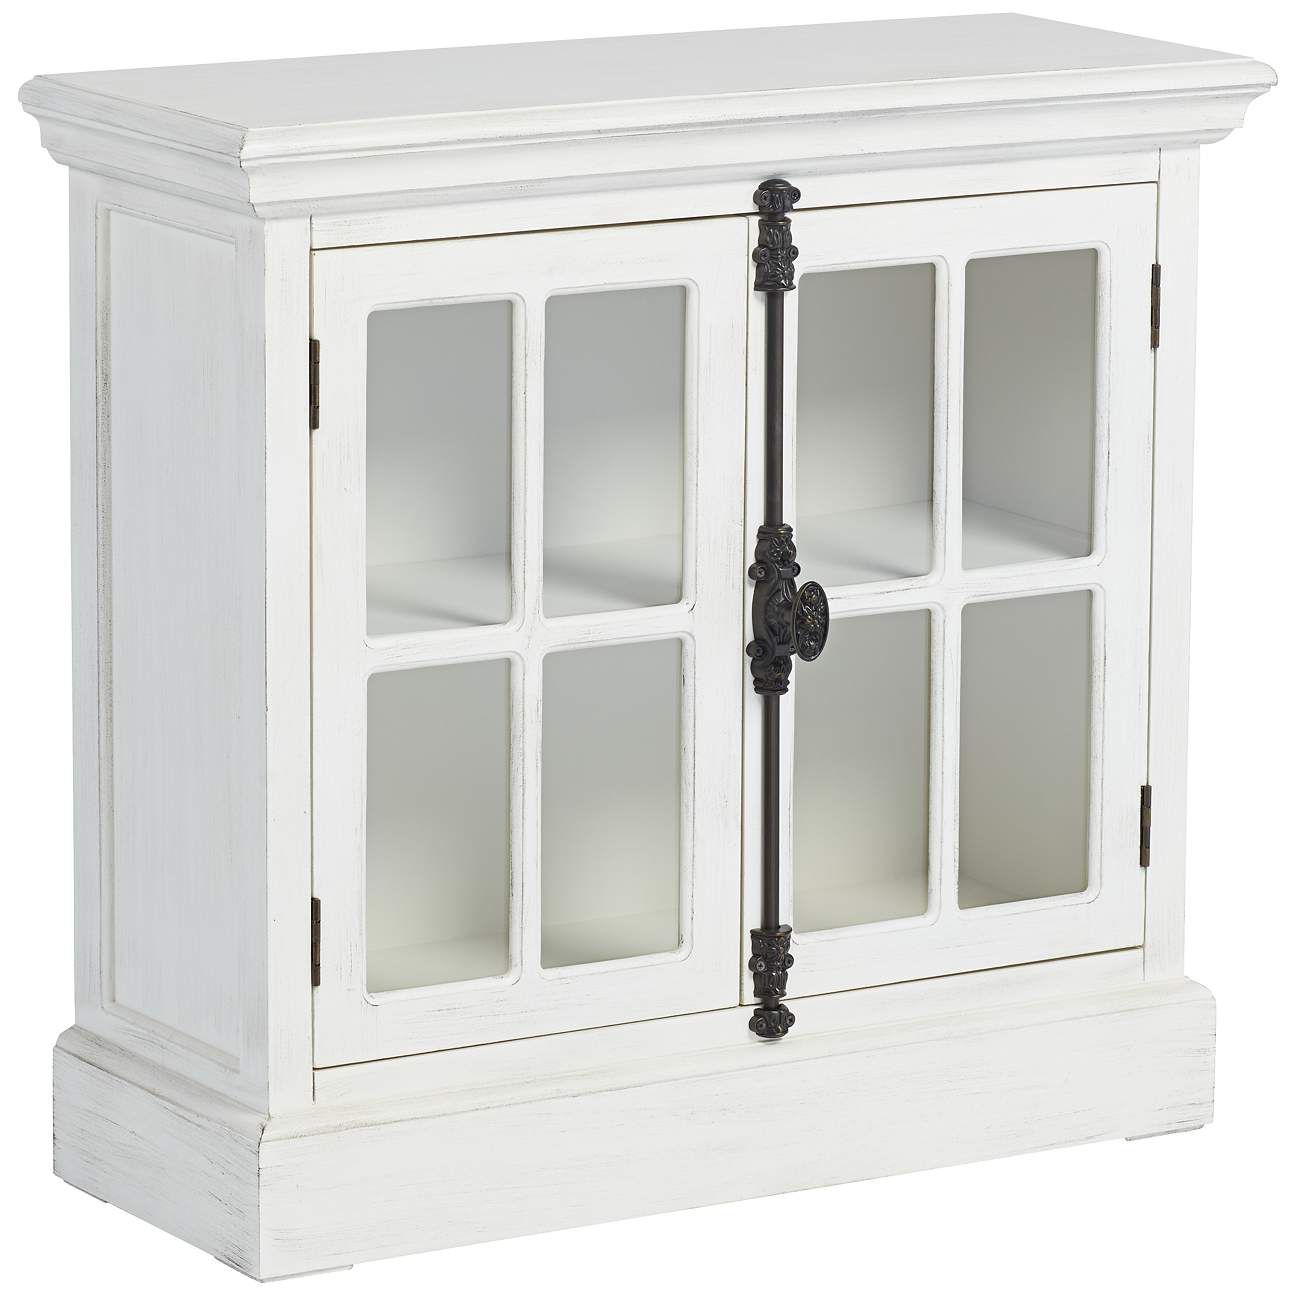 Coventry 36" Wide TV Media Console in White with Glass Doors | LampsPlus.com